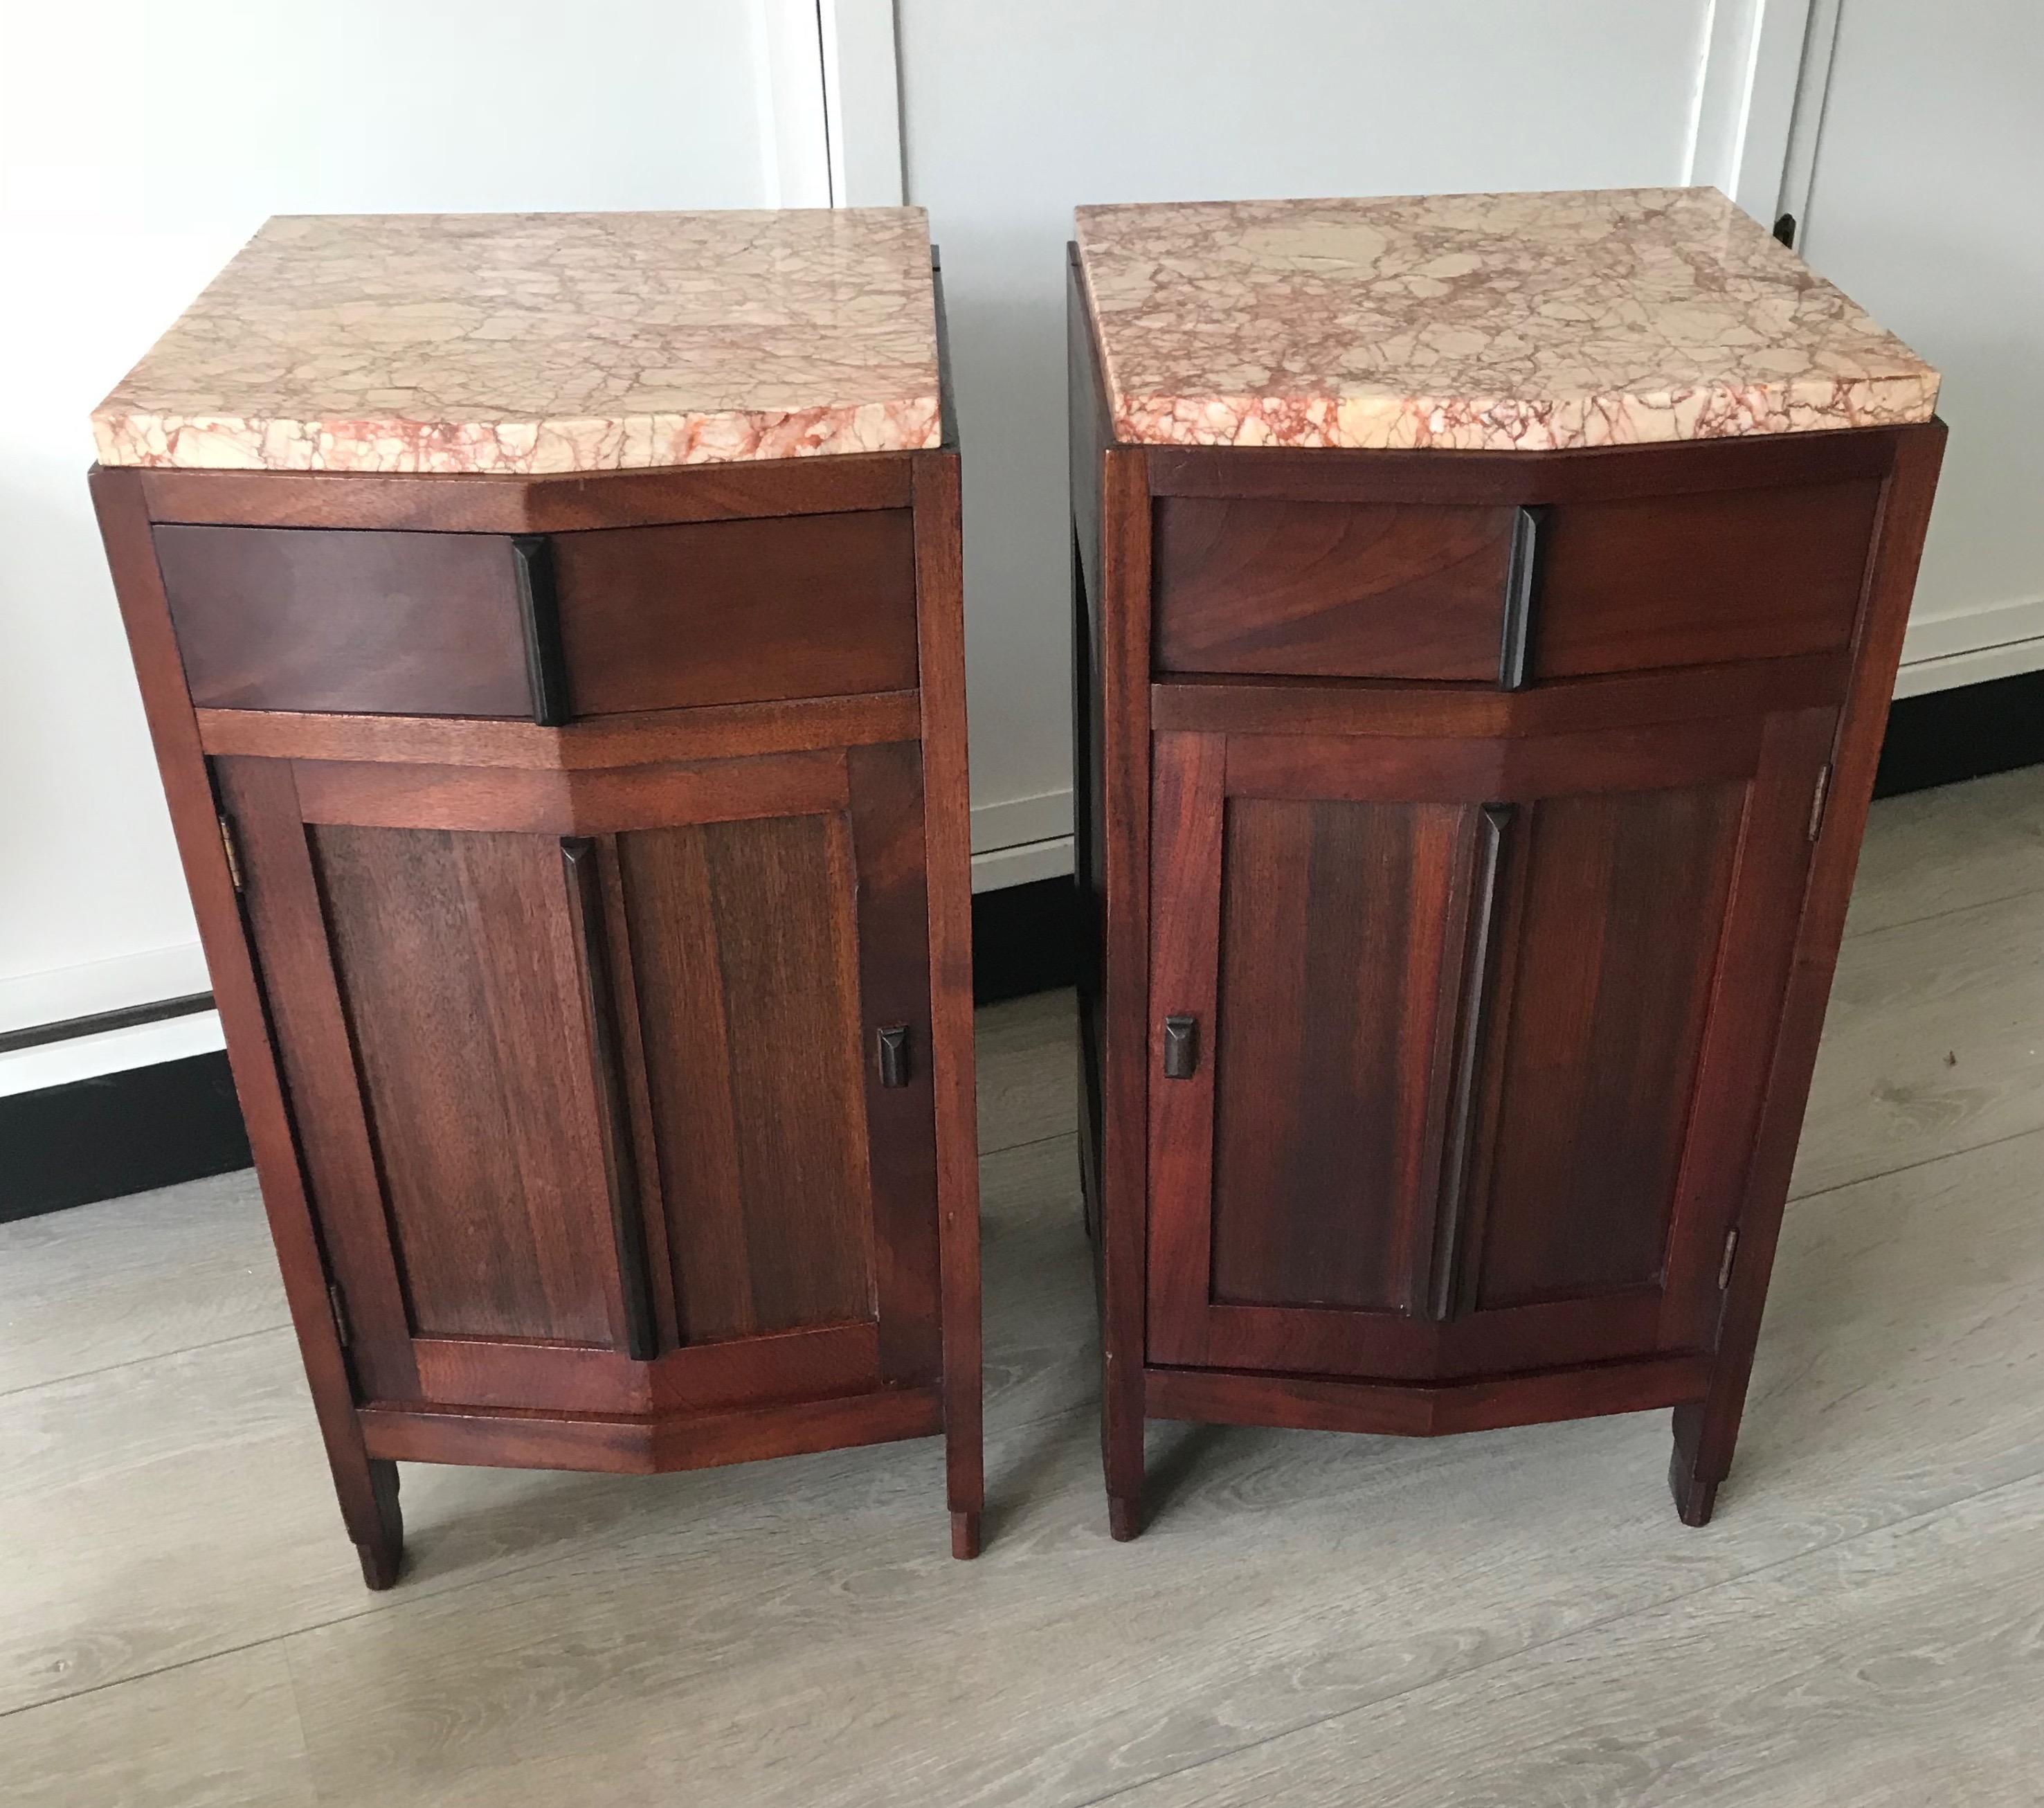 Hand-Crafted Amsterdam School Mahogany Macassar & Marble Nightstands Cabinets Tables